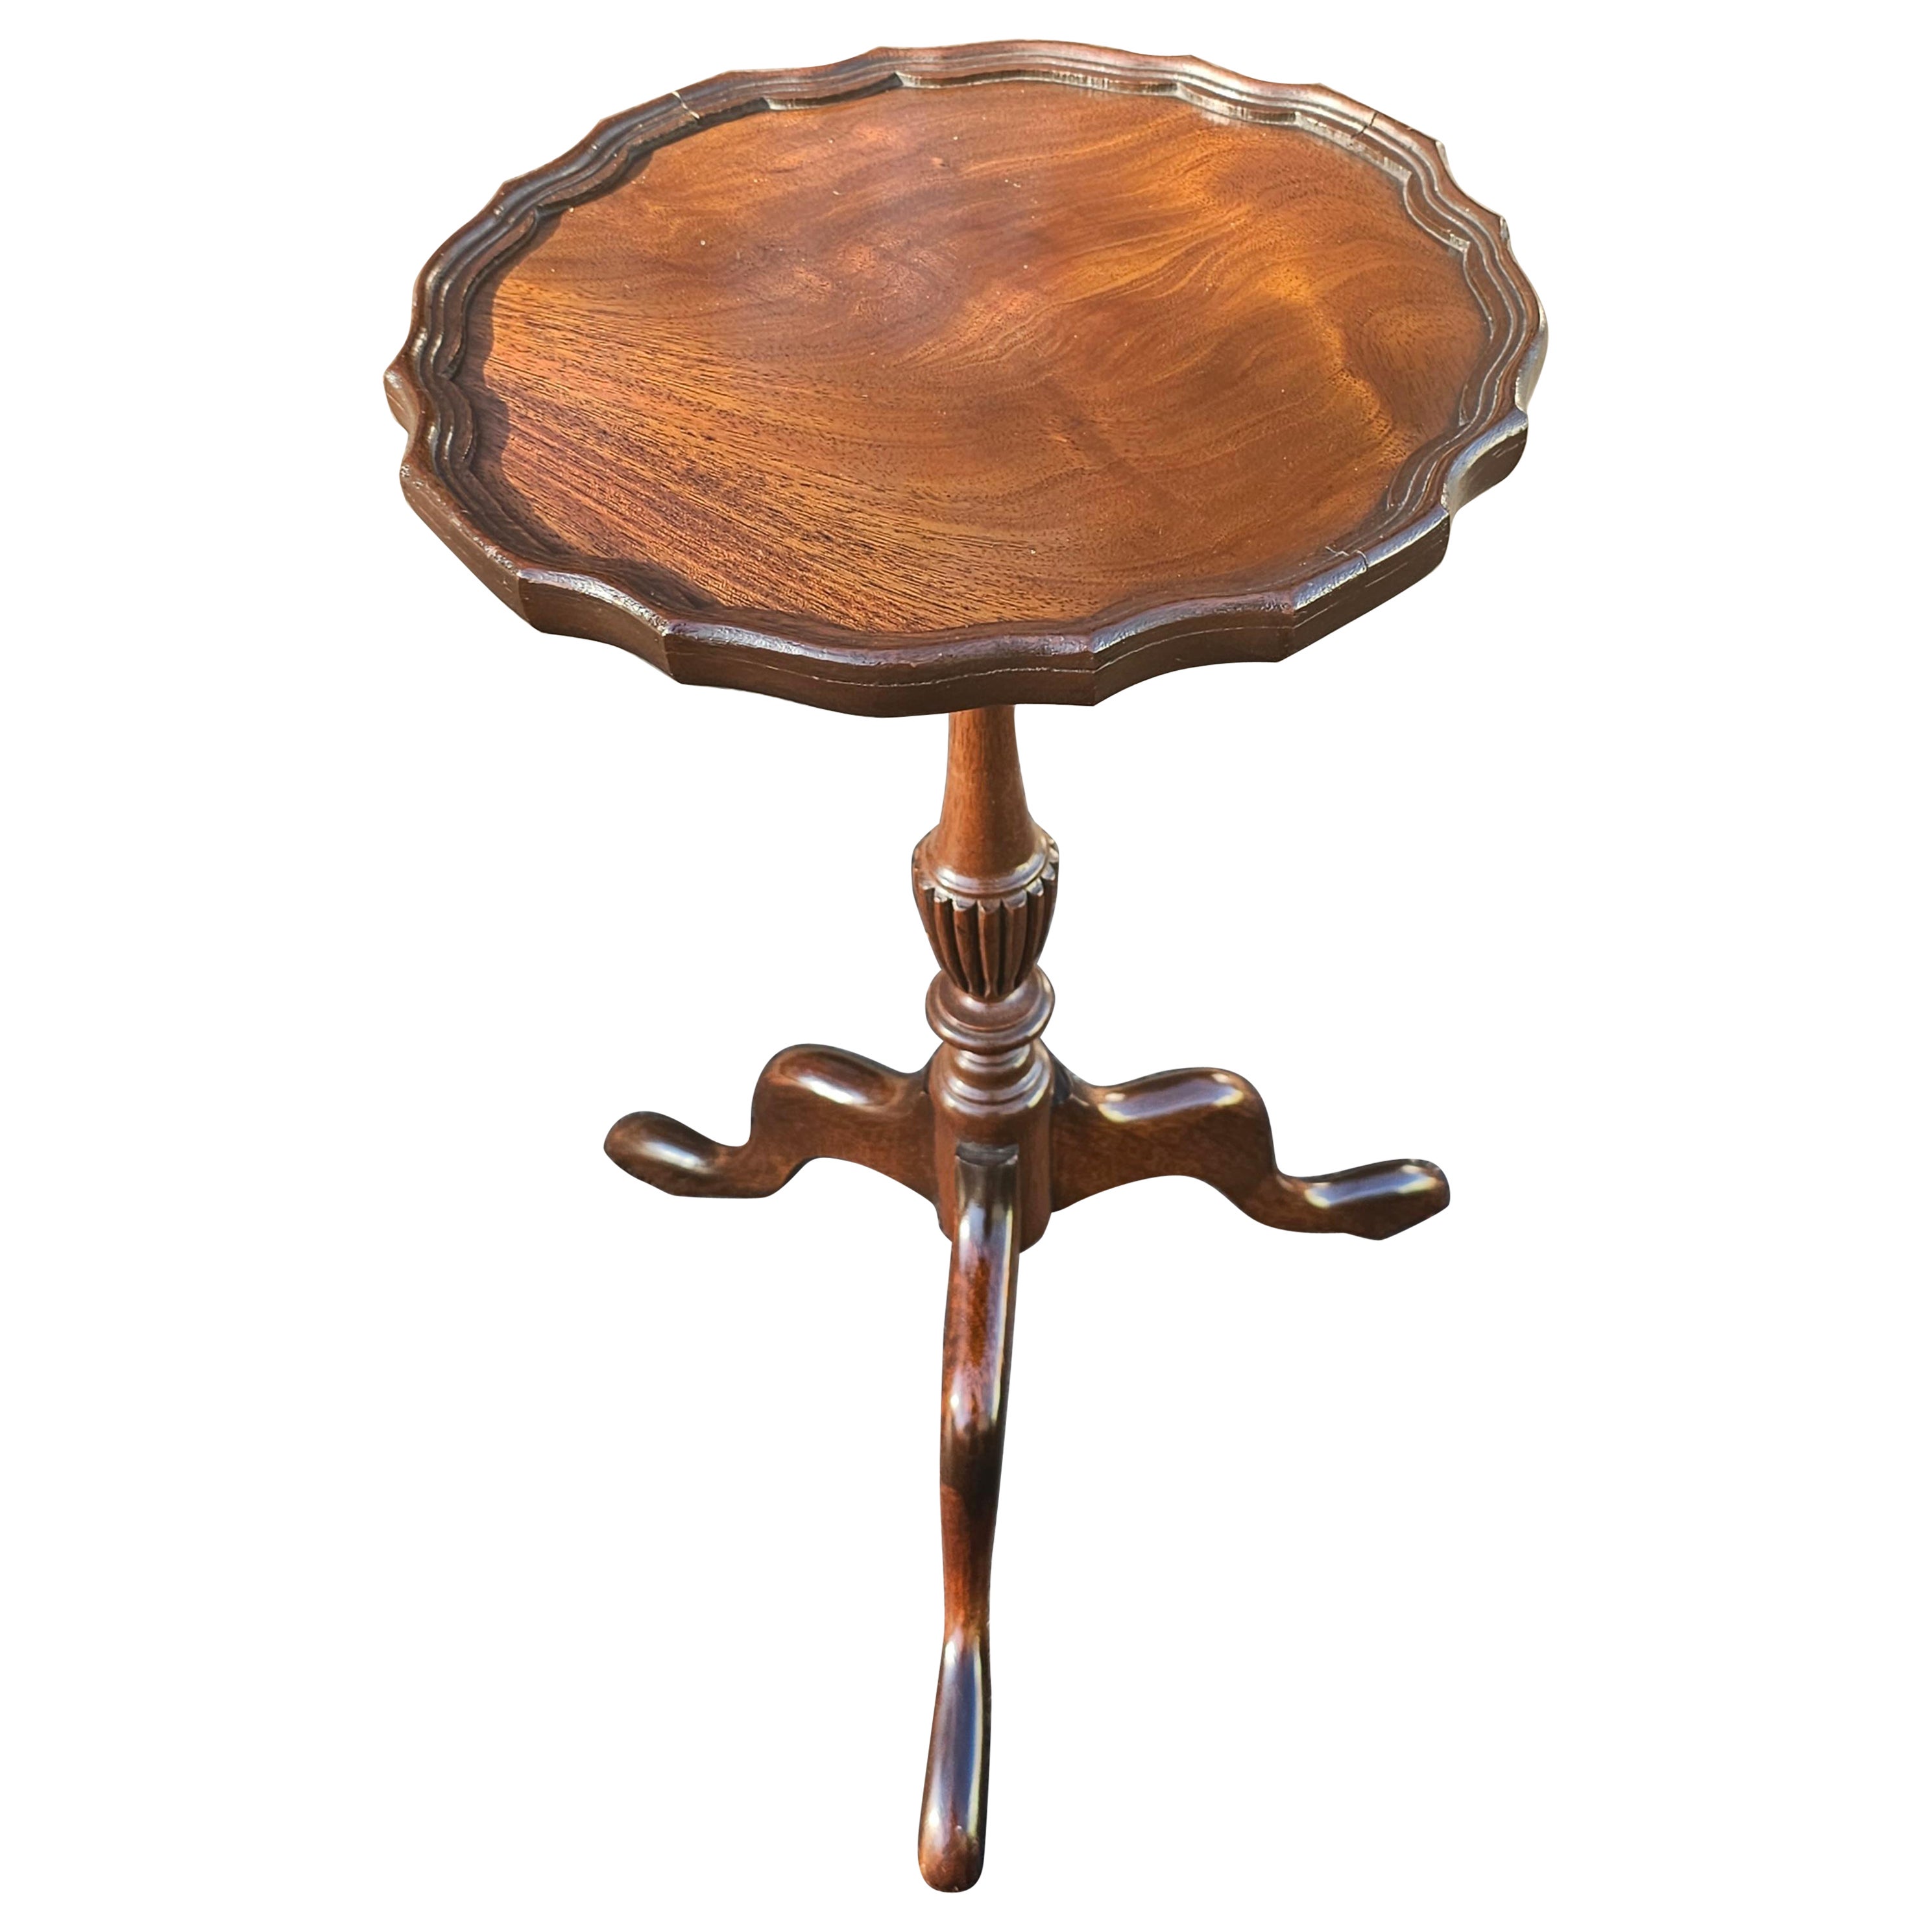 20th Century Solid Mahogany Pedestal Tripod Pie Crust Candle Stand w/Snake Feet For Sale